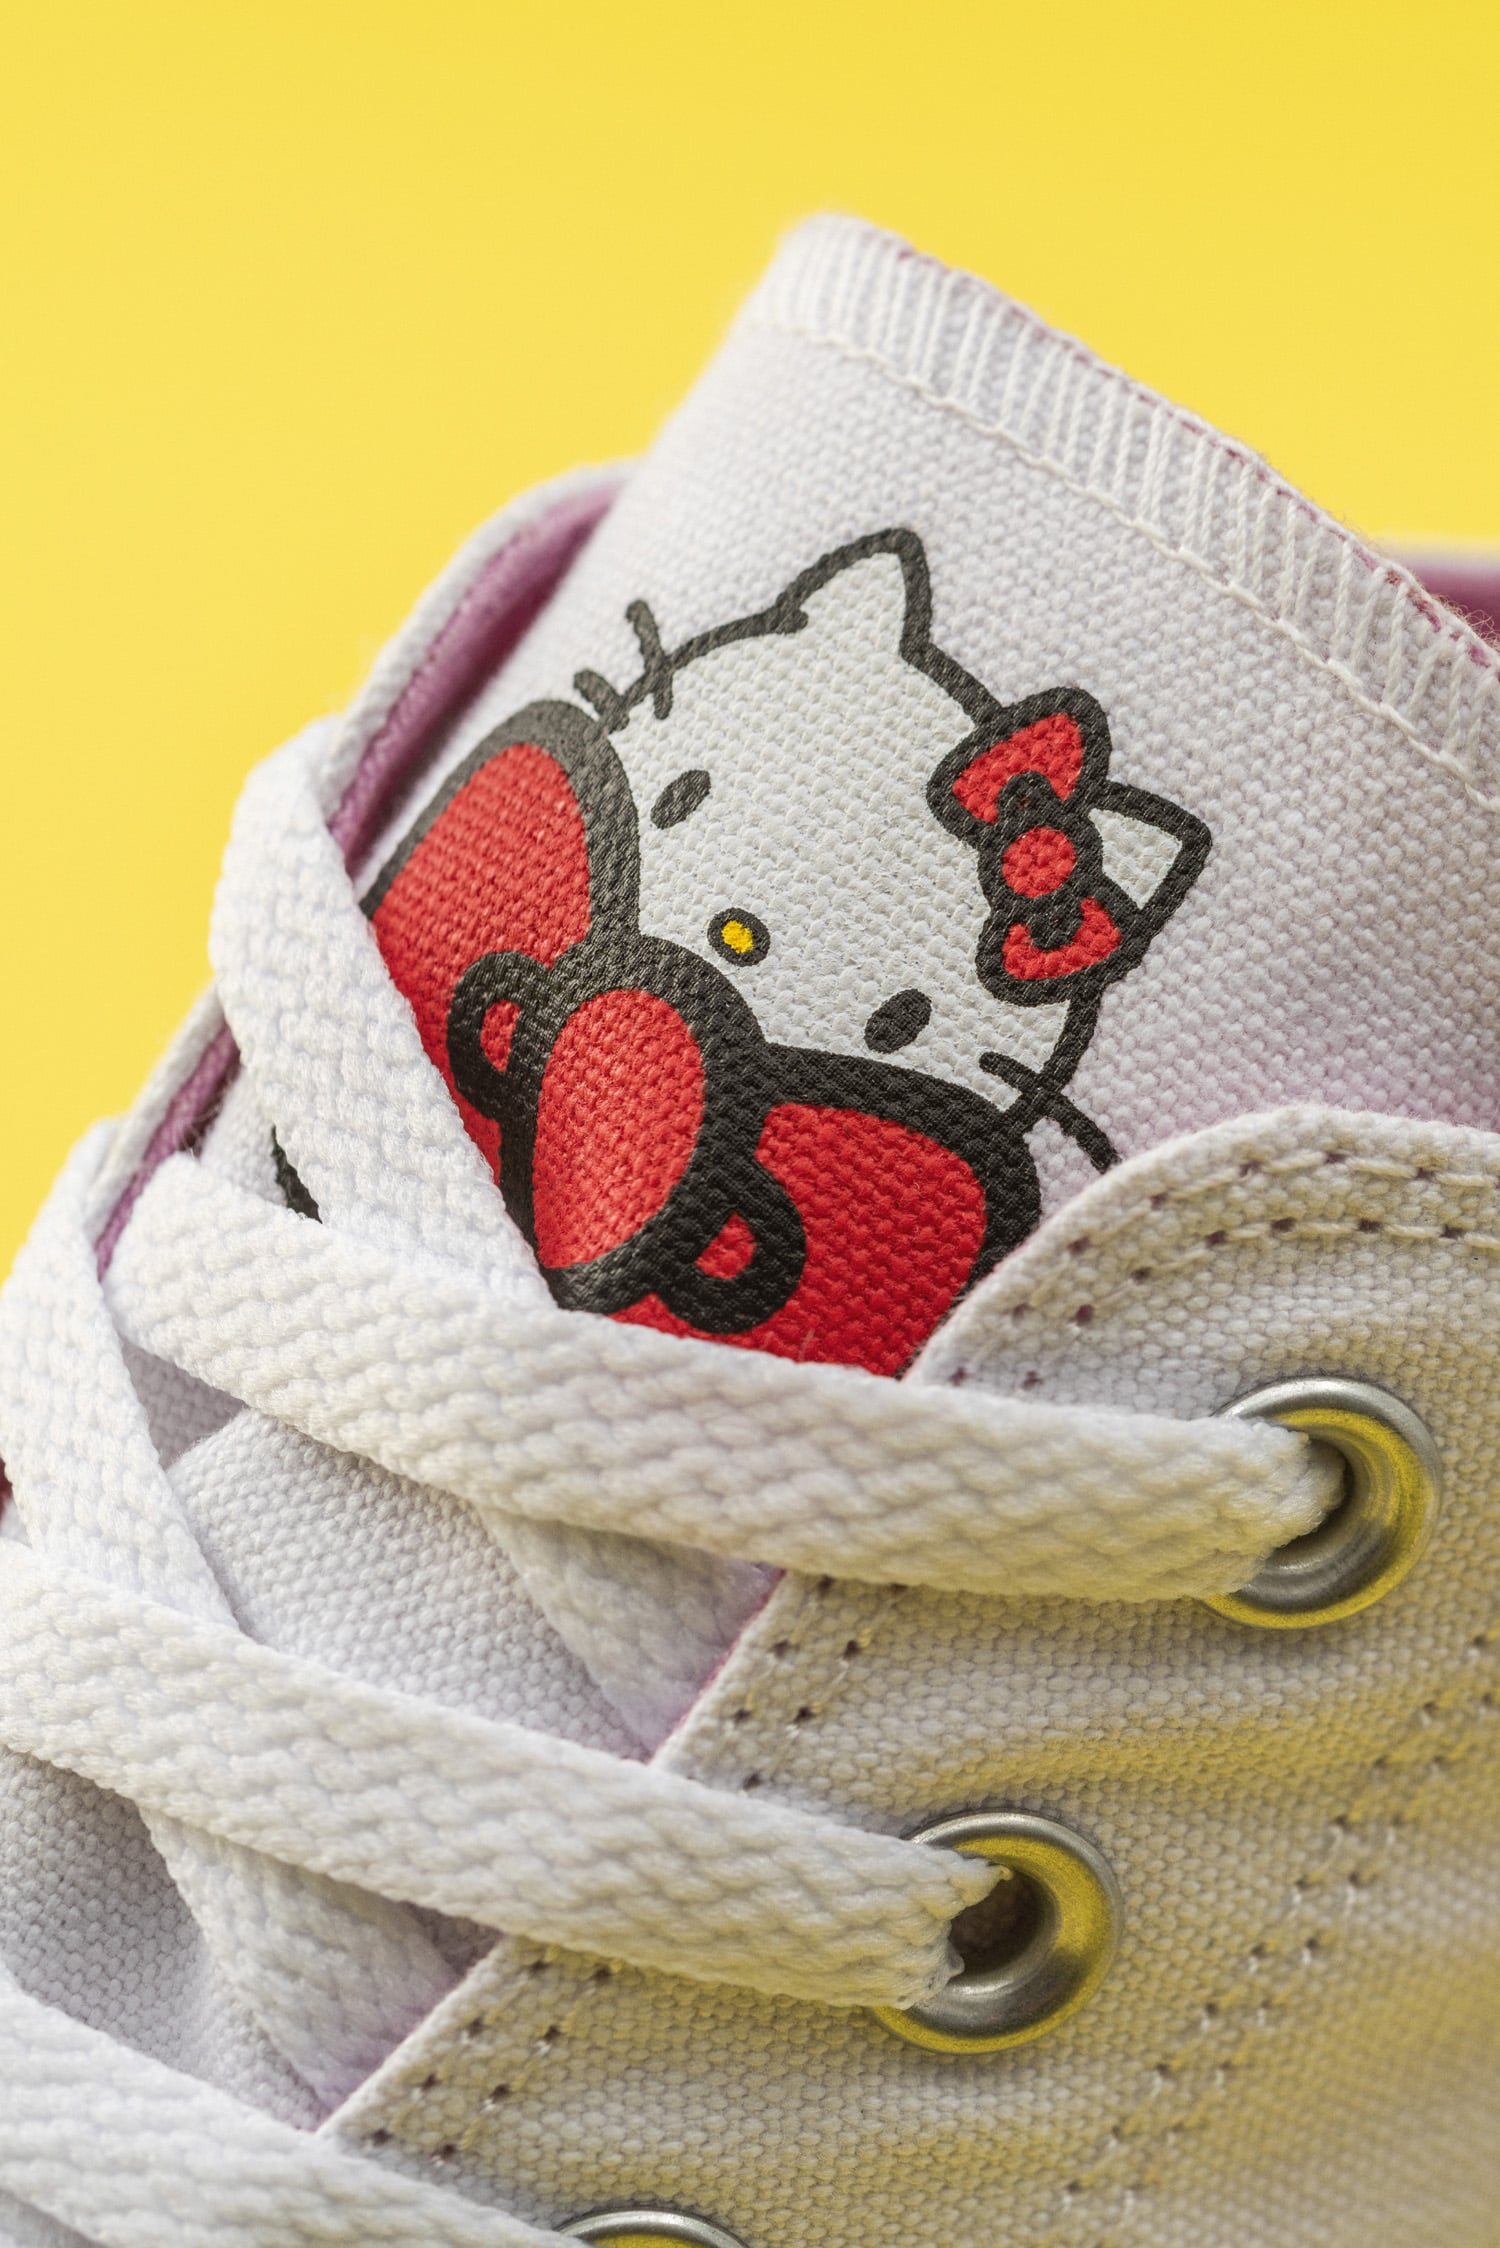 Fashion, Shopping & Style | Yep, Hello Kitty Converse Sneakers Are Real, We Can't Wait to Get Our Hands on Them | POPSUGAR Fashion Photo 4